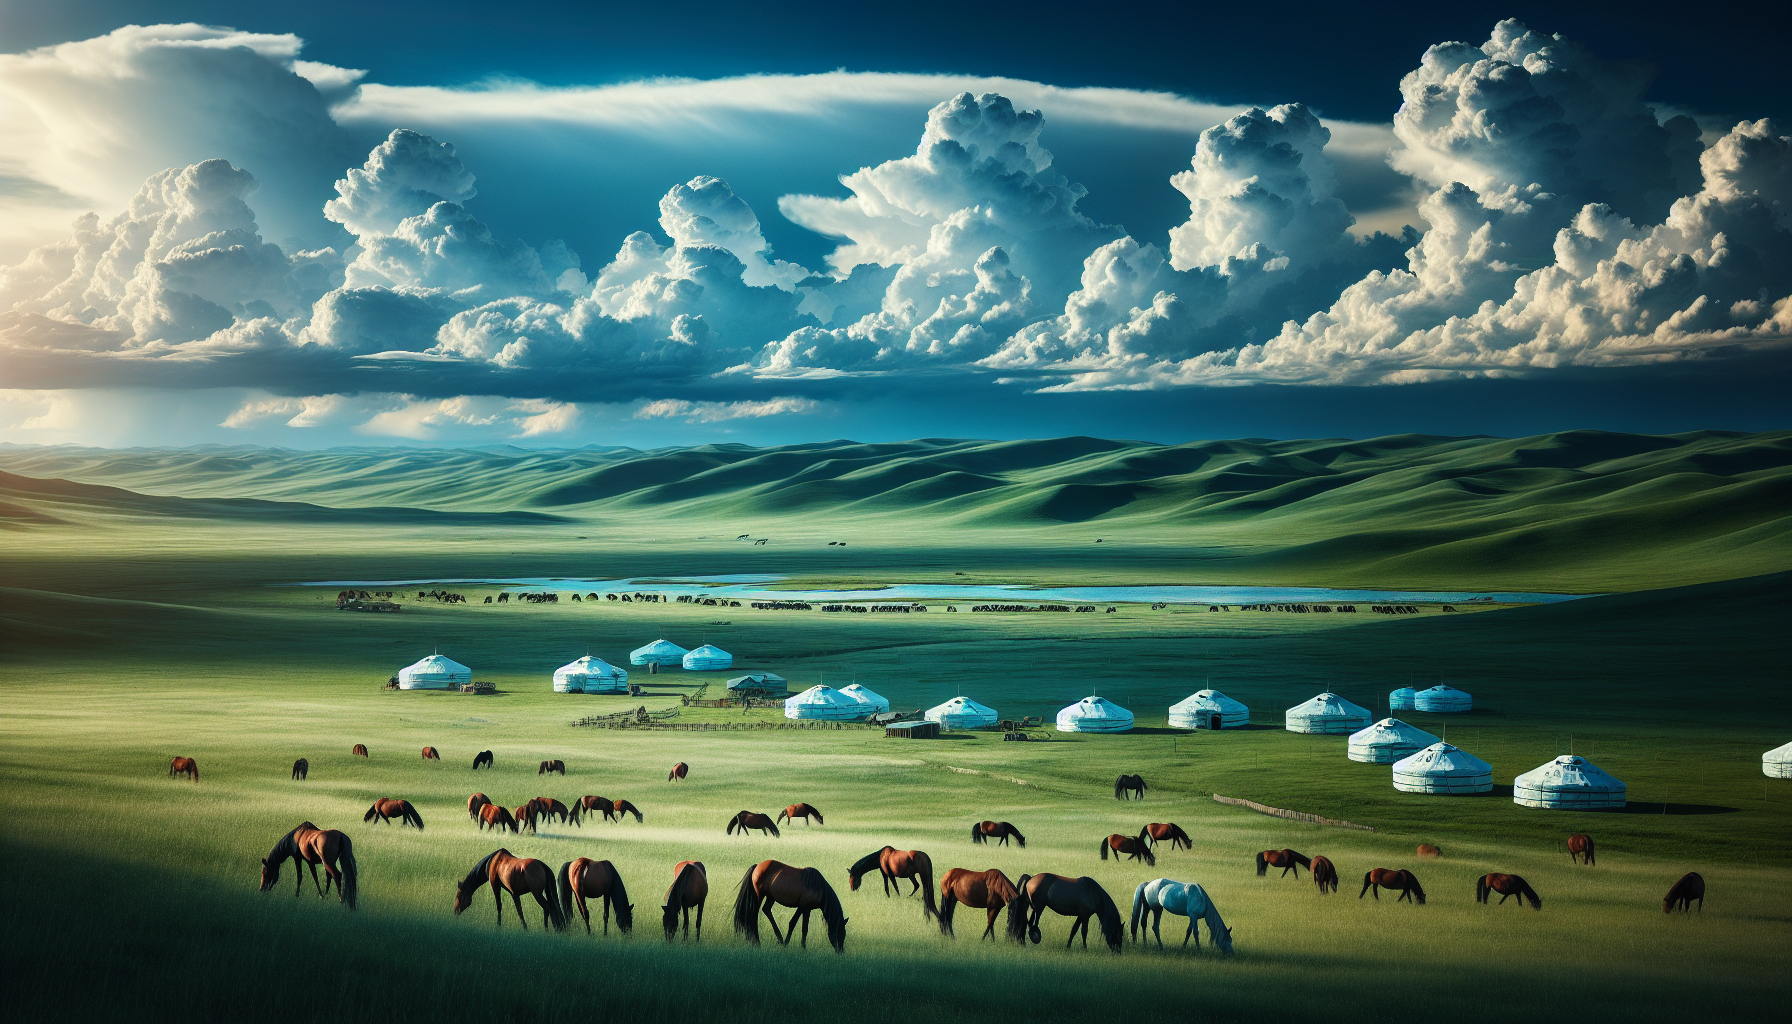 Scenic Mongolian landscape with grazing horses